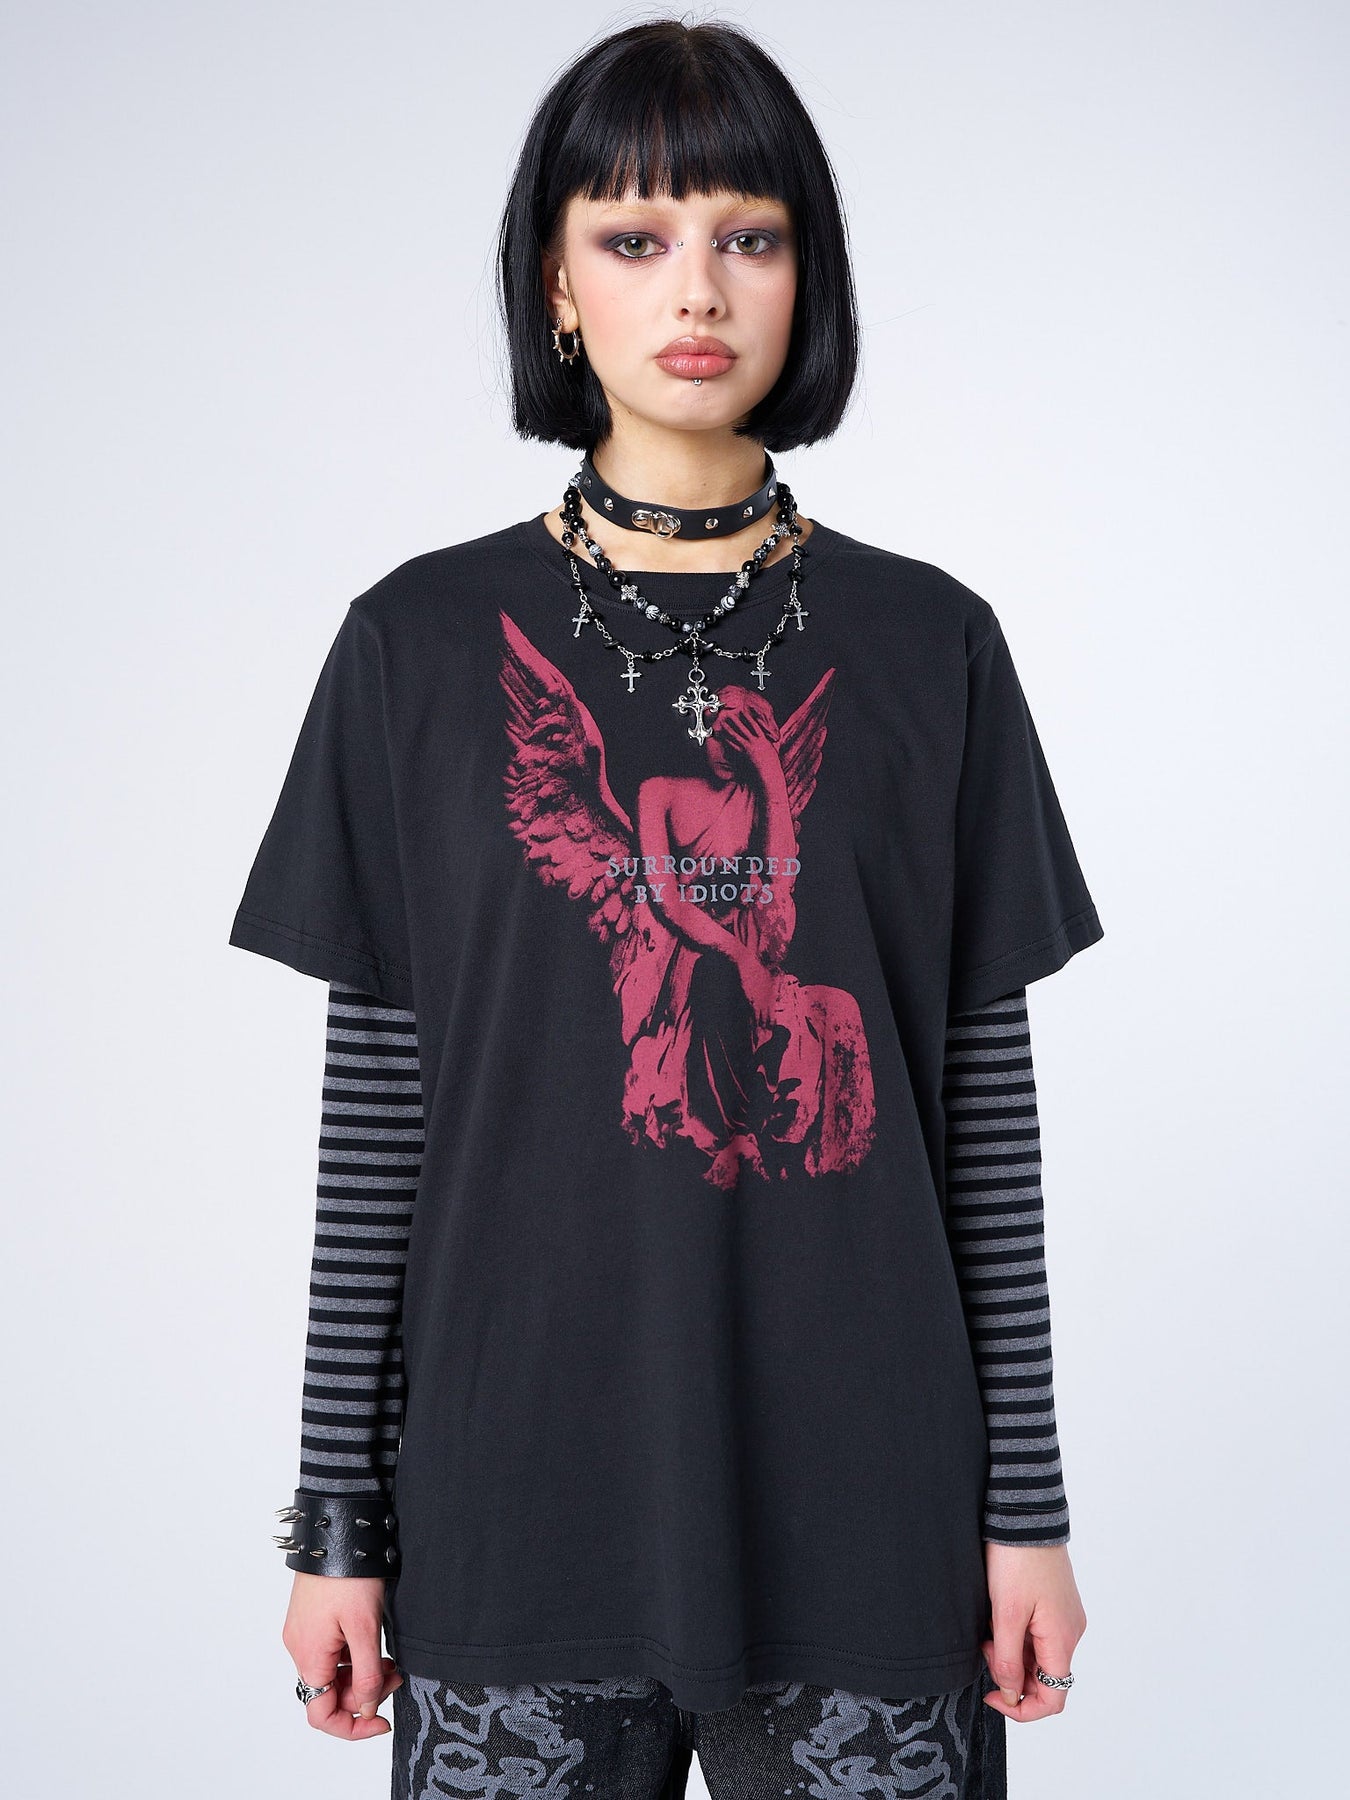 Black 'Surrounded by Idiots' Angel Graphic Tee - Y2K Grunge | Minga London